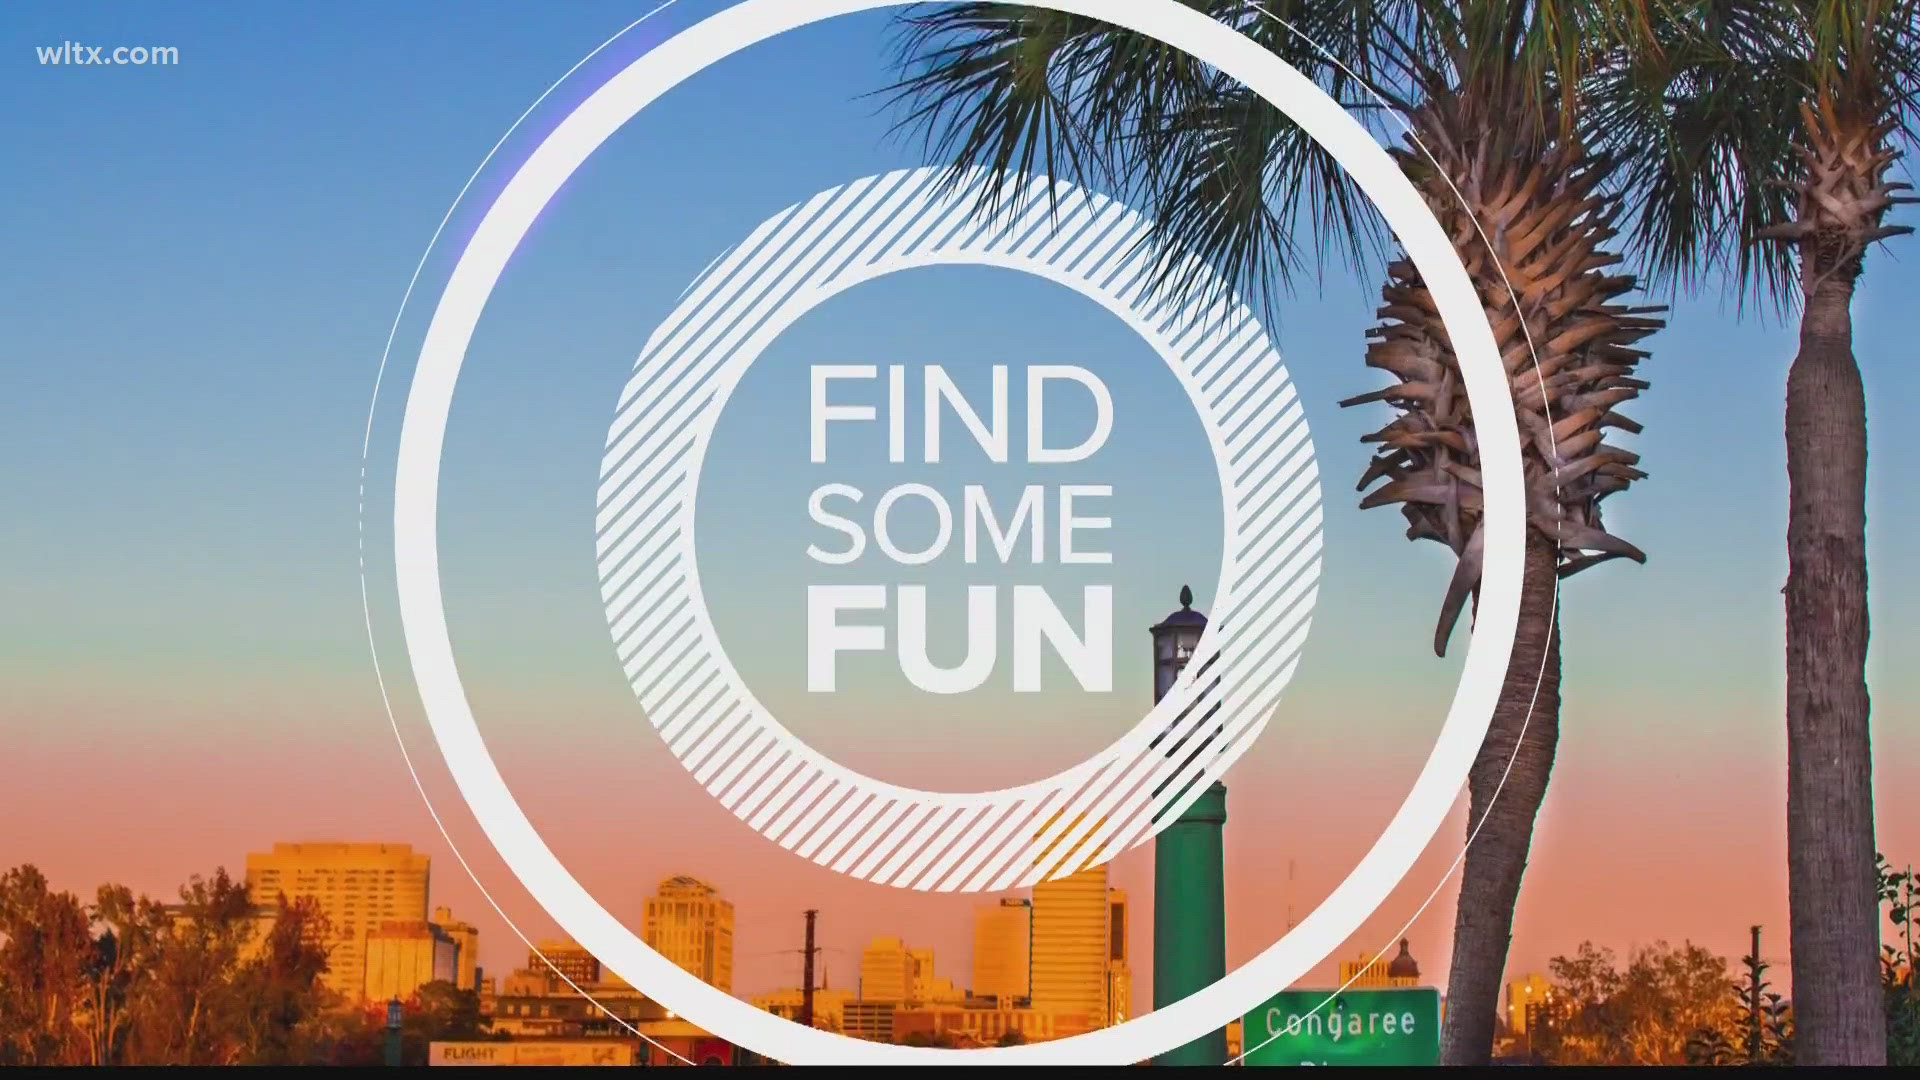 Looking for some fun this weekend? Here are a few ideas to get you started.